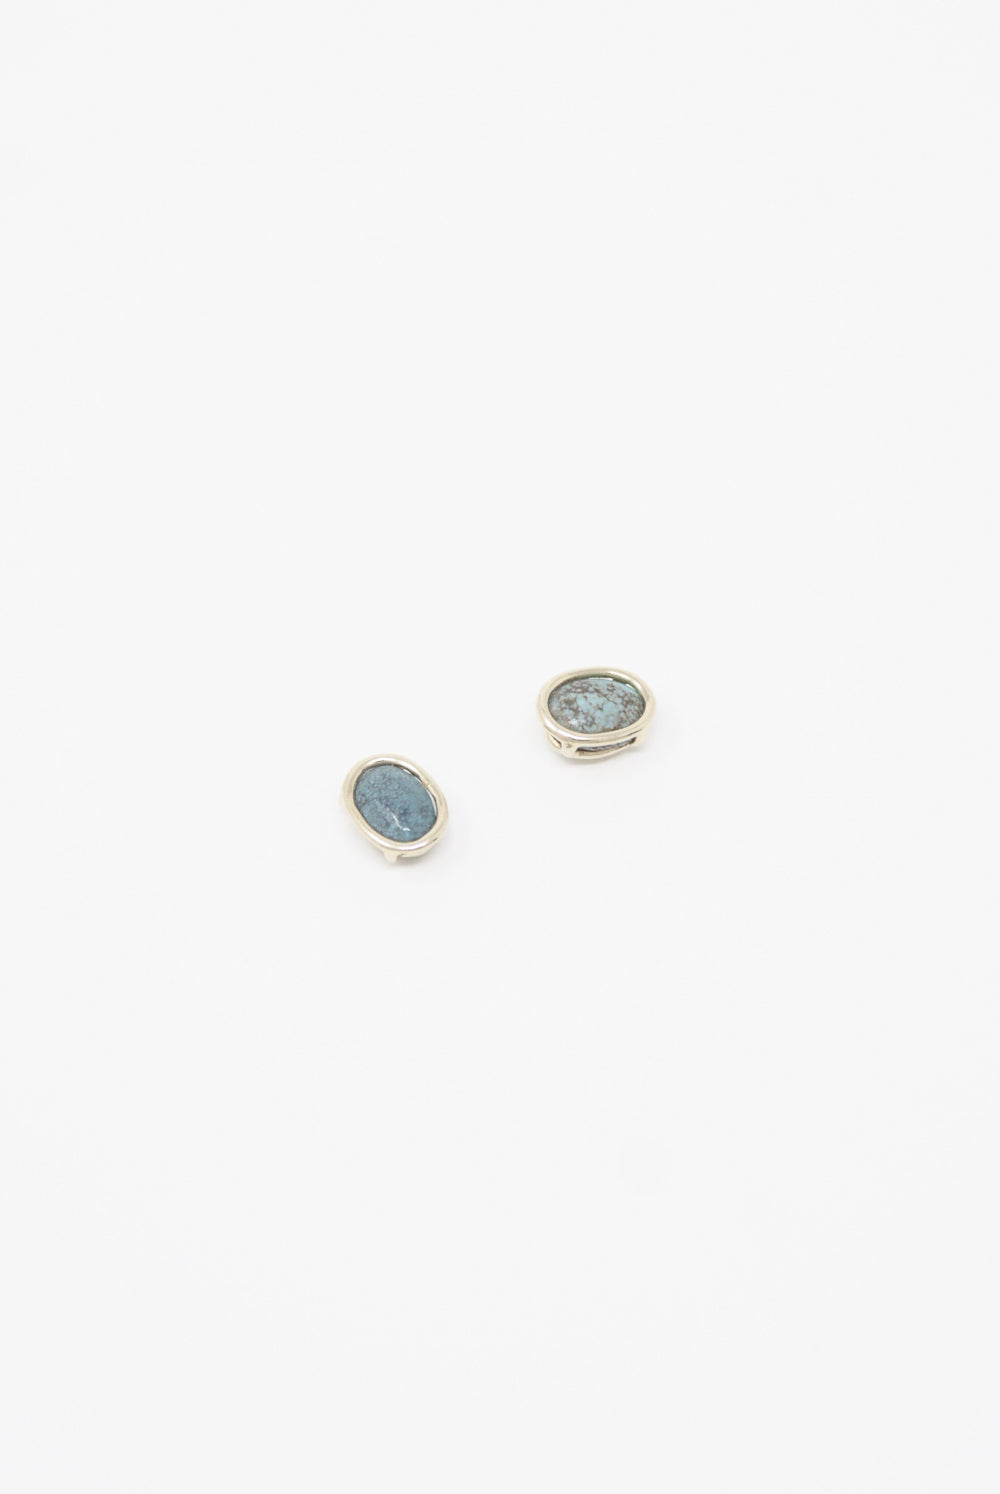 Mary MacGill - 14K Floating Studs in Turquoise